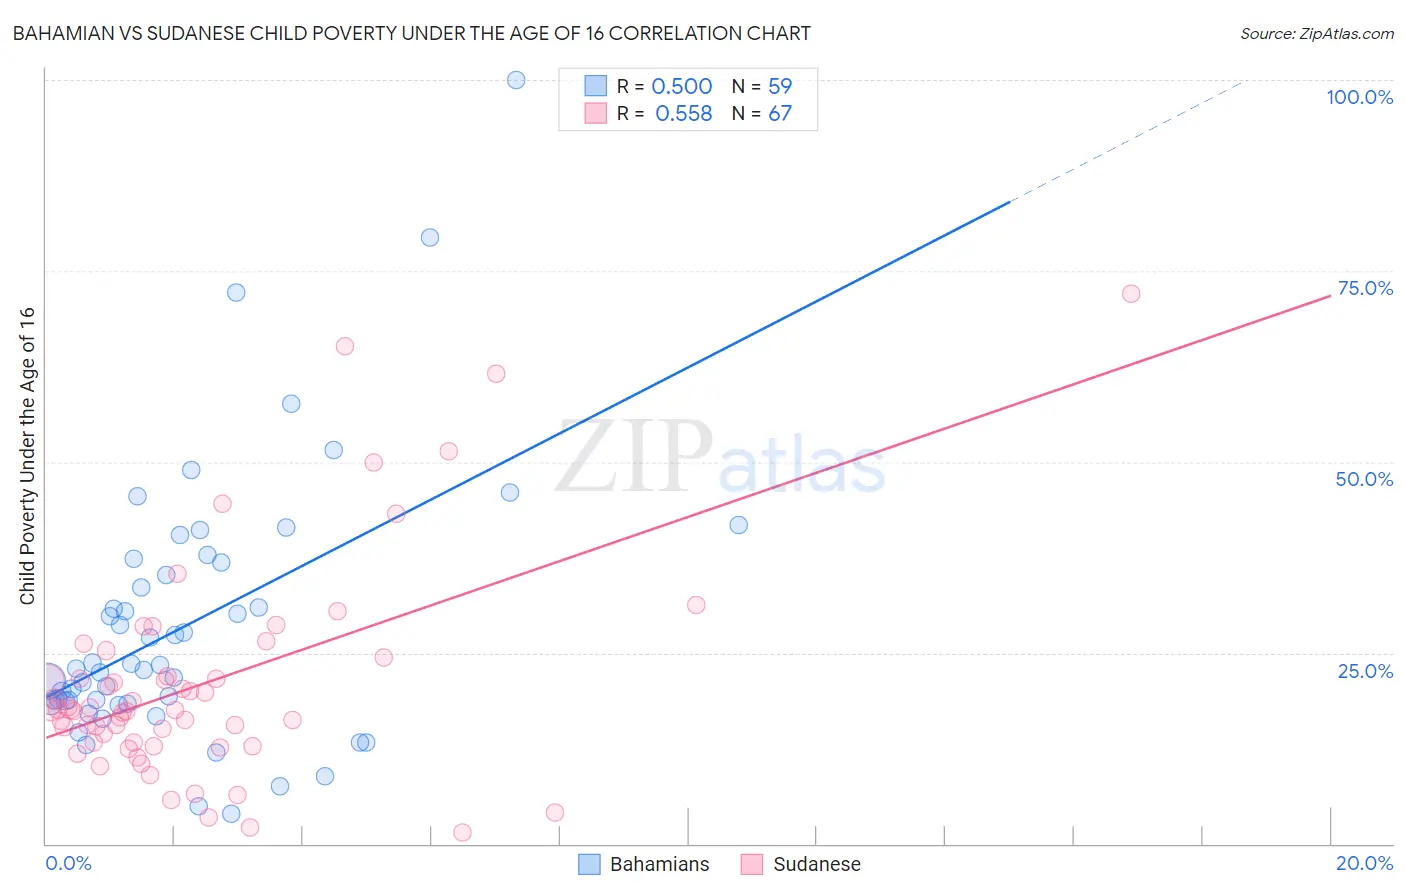 Bahamian vs Sudanese Child Poverty Under the Age of 16